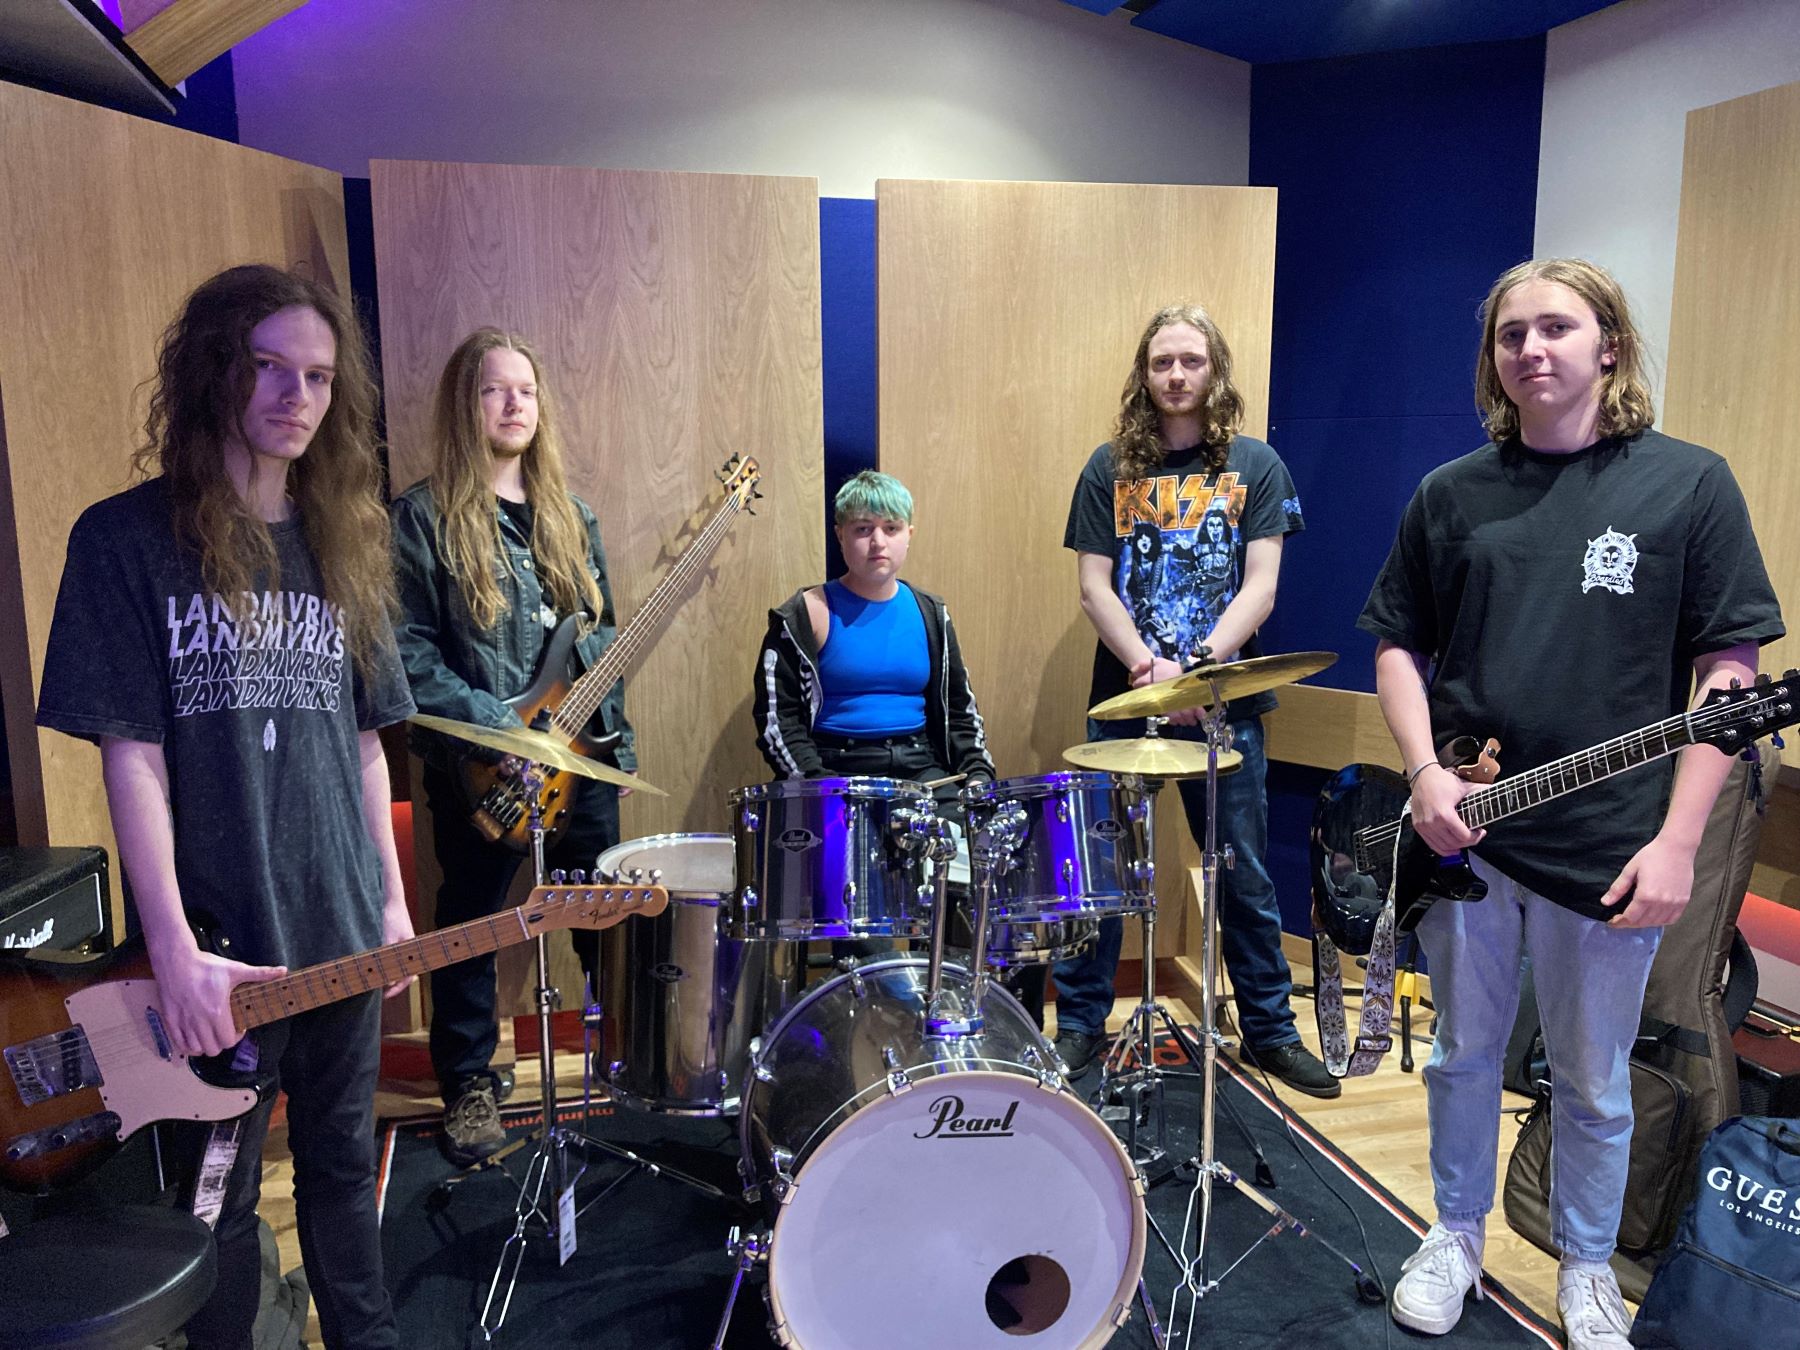 Five piece rock band in studio. Four long-haired young man and girl drummer with short hair